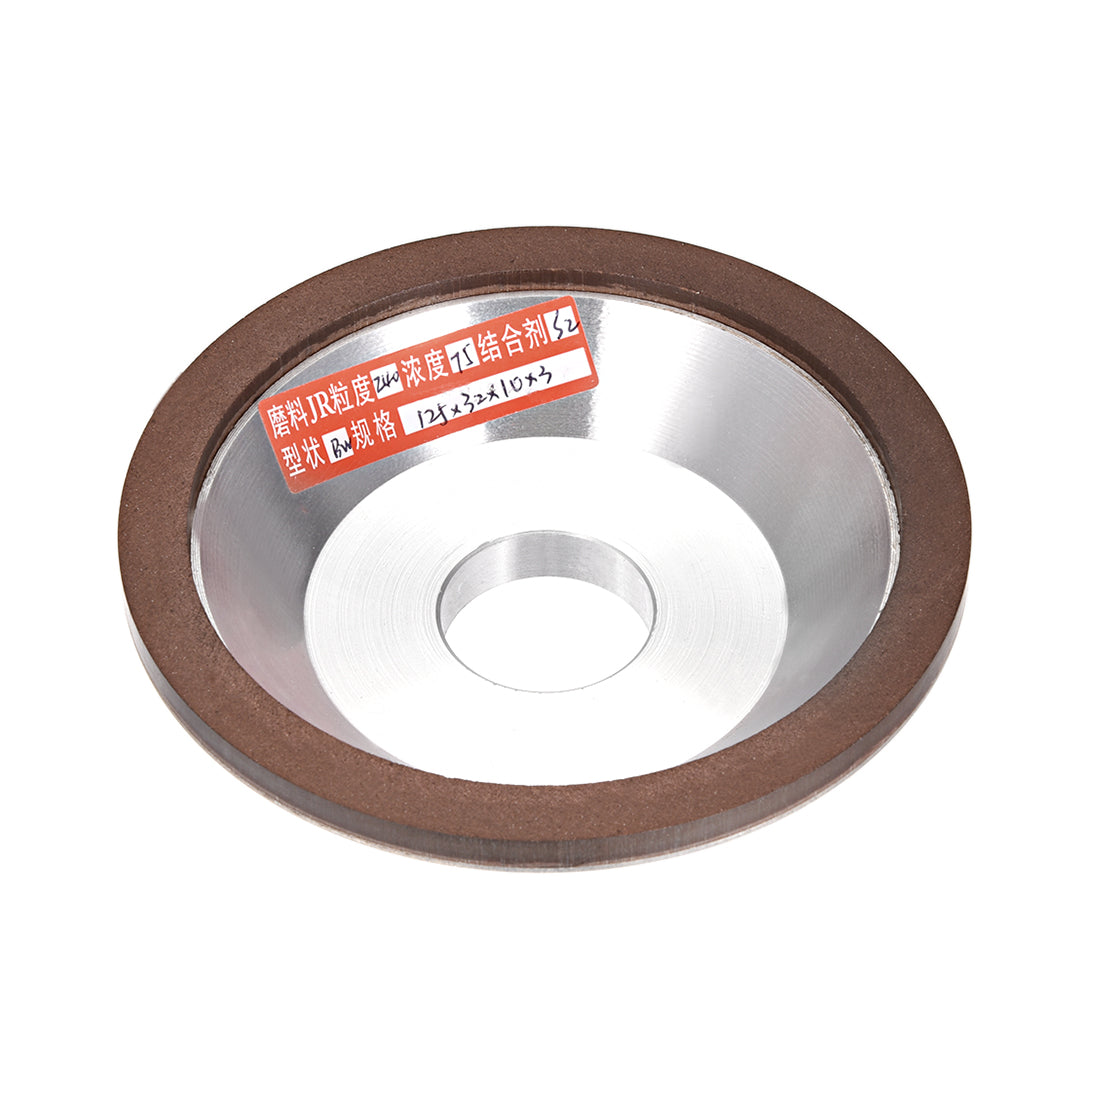 Uxcell Uxcell 5-inch Flaring Cup Diamond Grinding Wheels Resin Bonded Abrasive Wheel 240 Grits